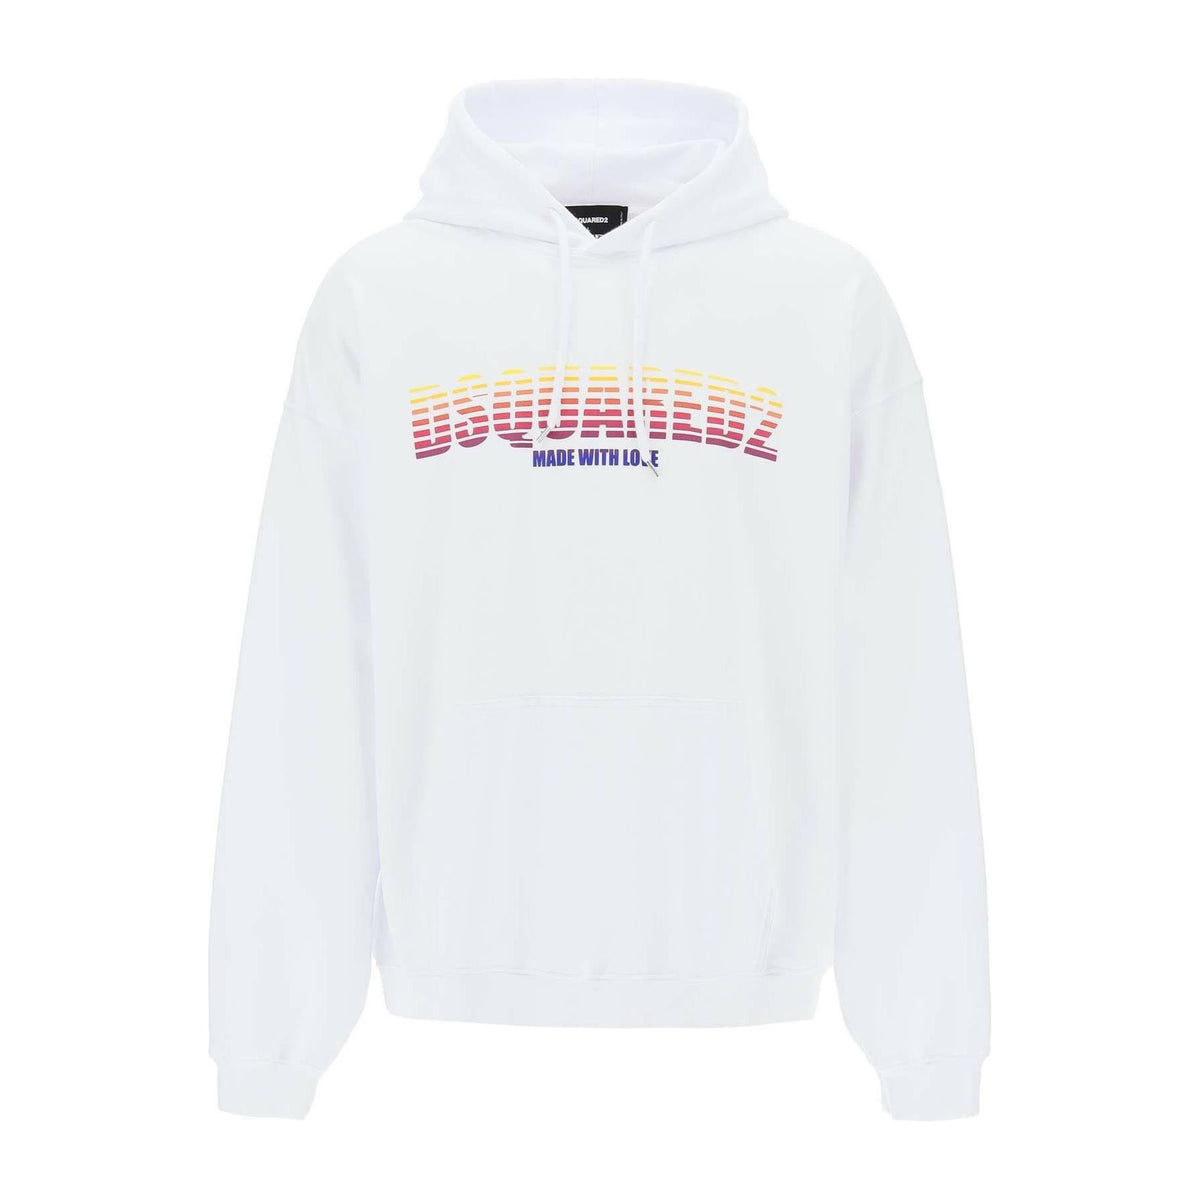 White Loose-Fit Cotton Sweatshirt With Multicolored Graphic Lettering DSQUARED2 JOHN JULIA.